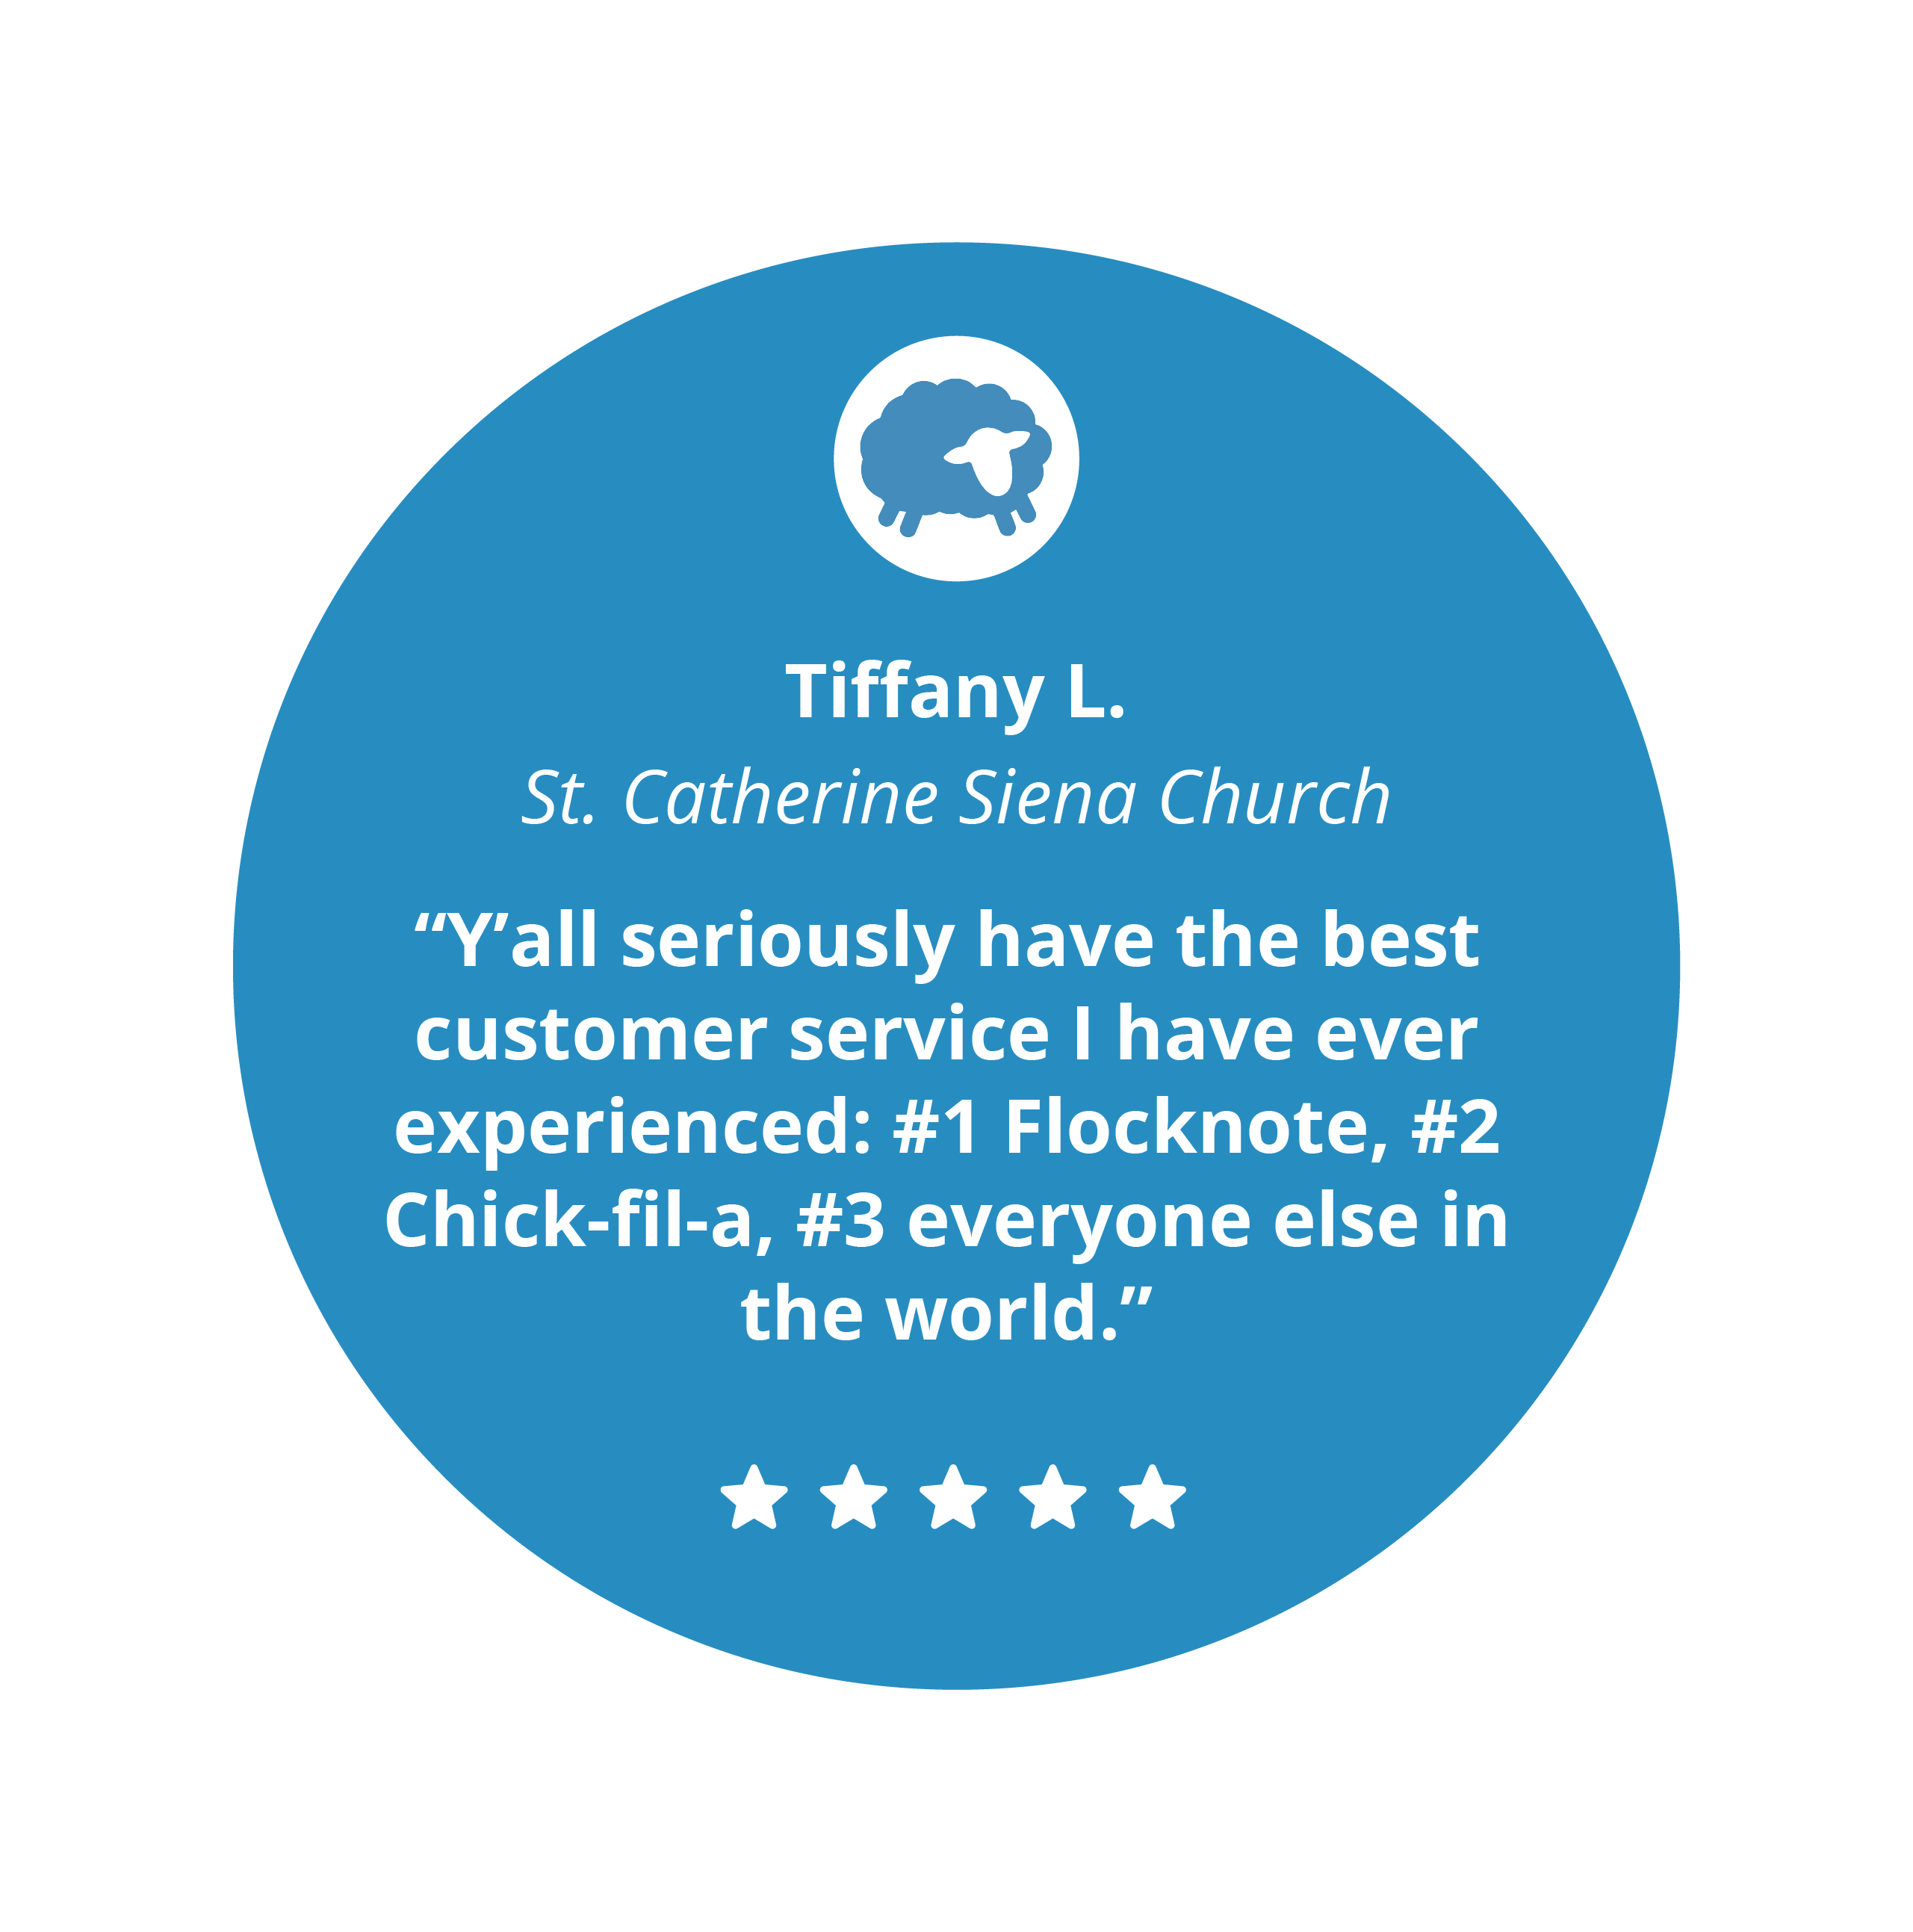 5 star review from Tiffany L. from St. Catherine Siena Church, "Y’all seriously have the best customer service: #1 Flocknote, #2 Chick-fil-a, #3 everyone else in the world.”